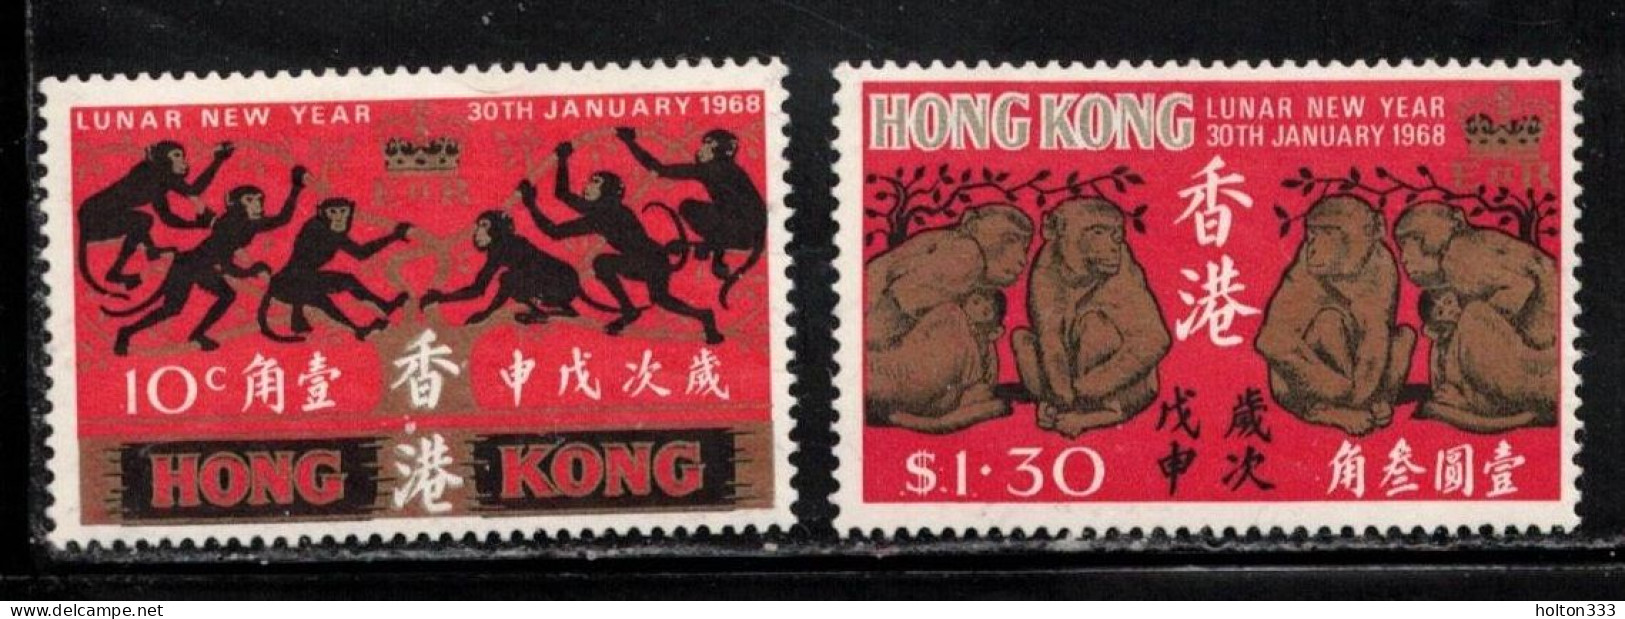 HONG KONG Scott # 237-8 MH - New Year Festival 1968 - Unused Stamps